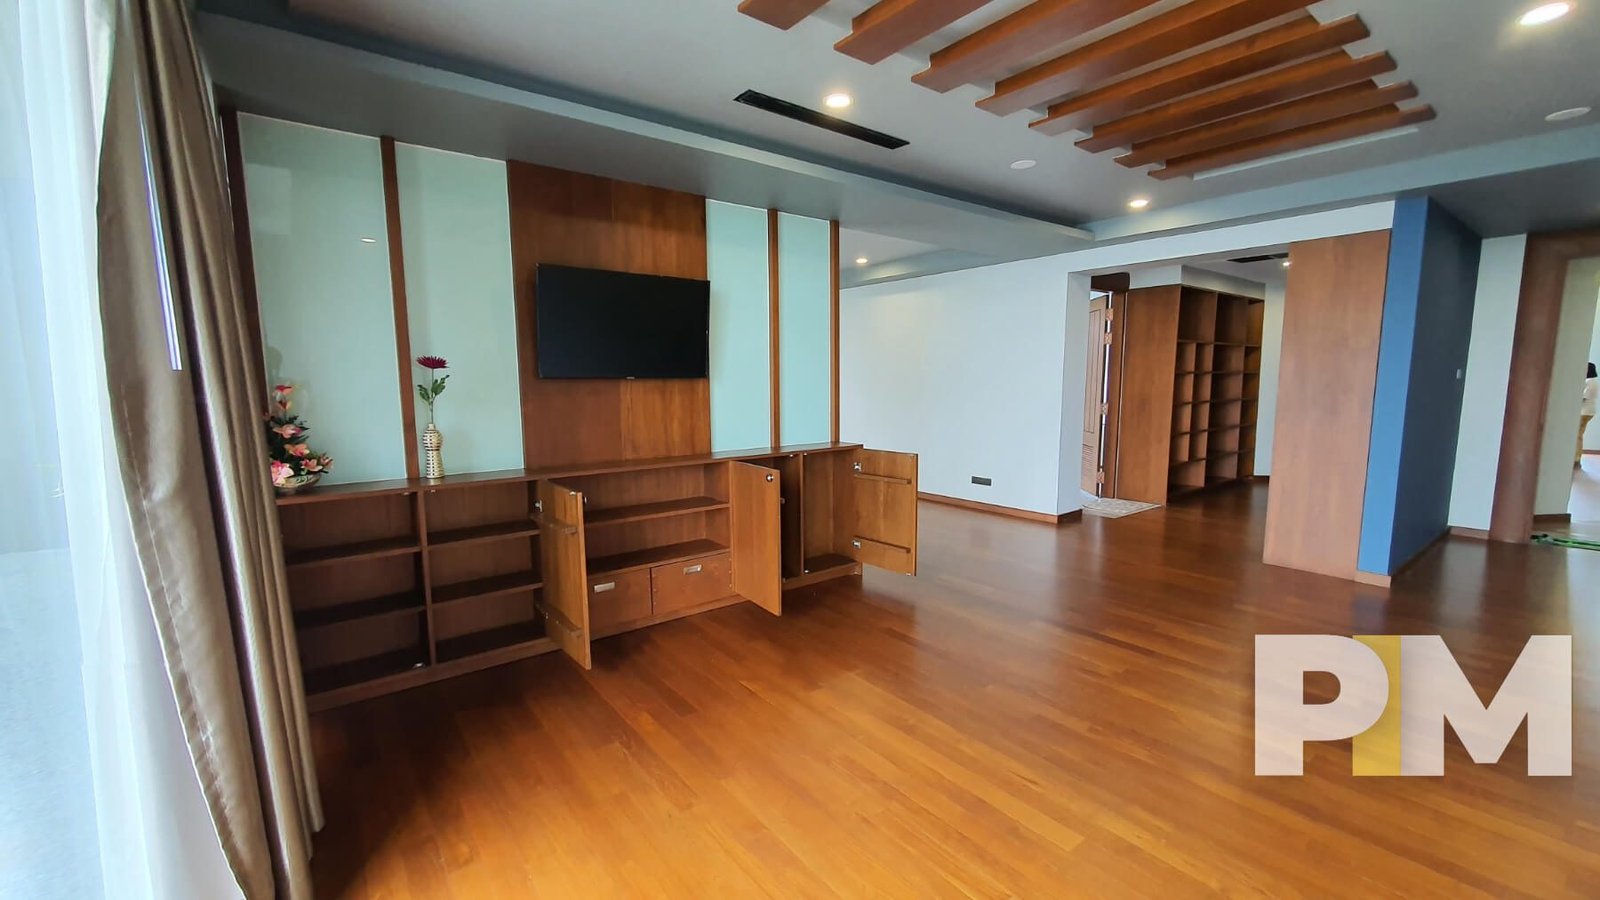 room with TV - Yangon Real Estate